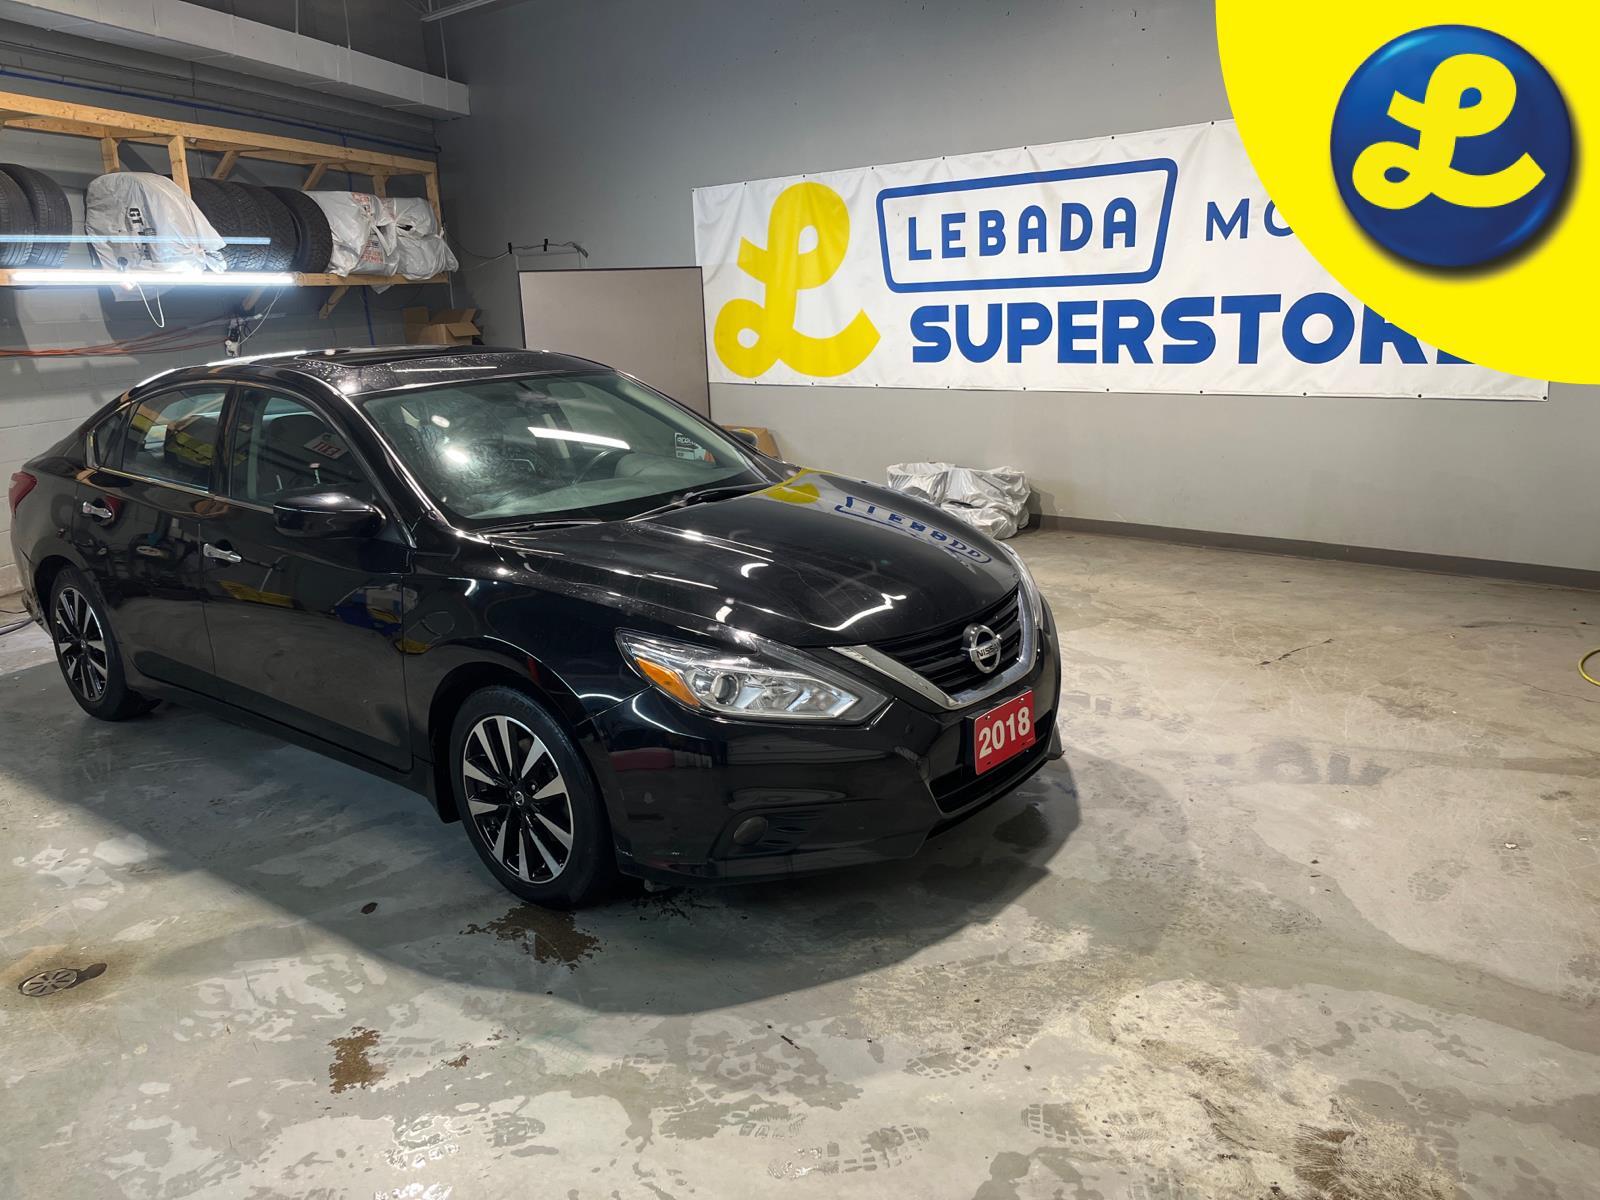 2018 Nissan Altima Why Wait? Drive Now low payments! 